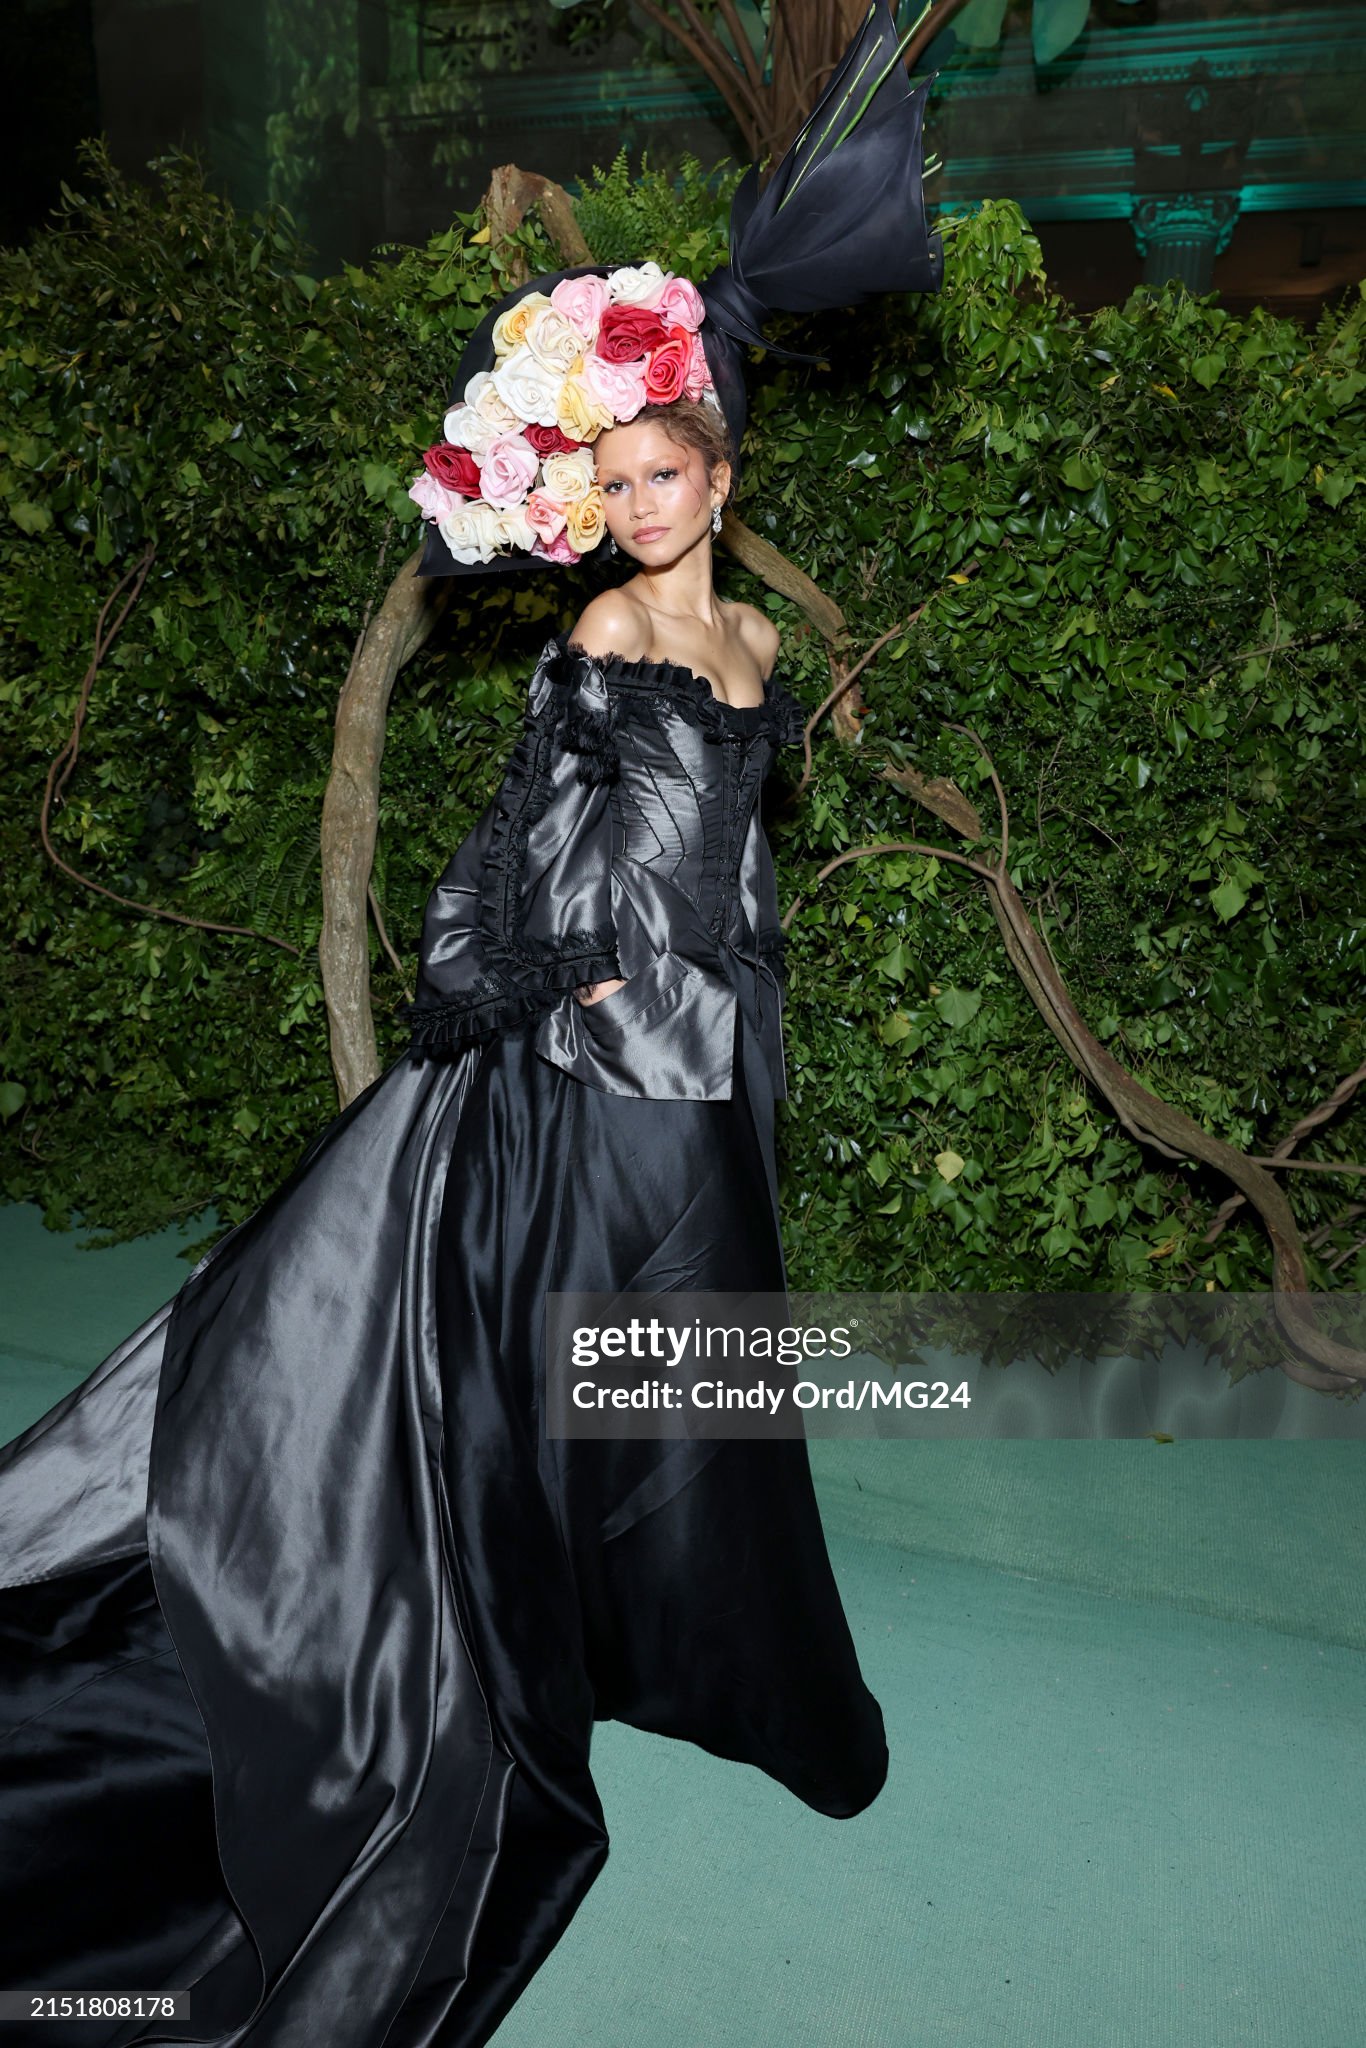 gettyimages-2151808178-2048x2048.jpg